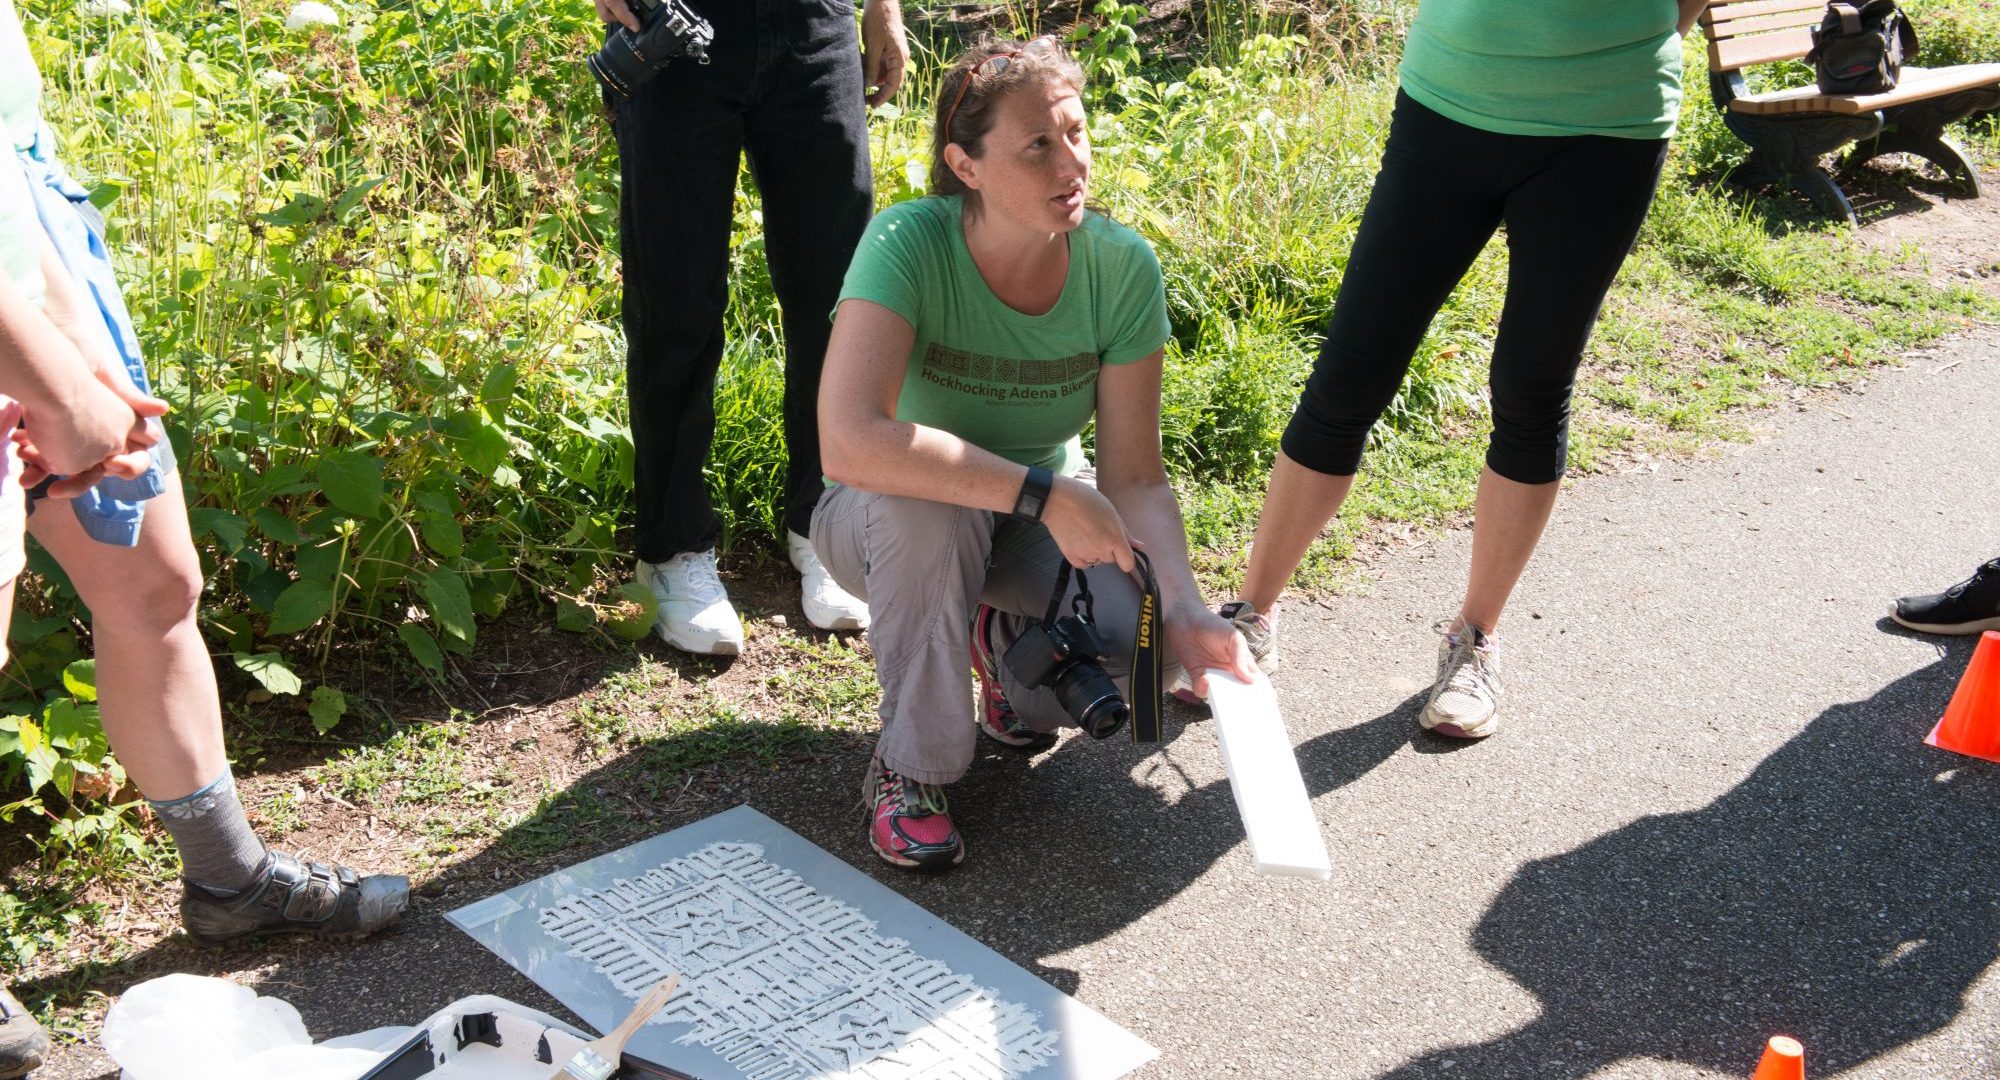 Annie Laurie Cadmus, director of sustainabilty at Ohio University, gives volunteers instructions before painting mile markers on the HockHocking Adena Pathway. © Ohio University / Photo by Kaitlin Owens